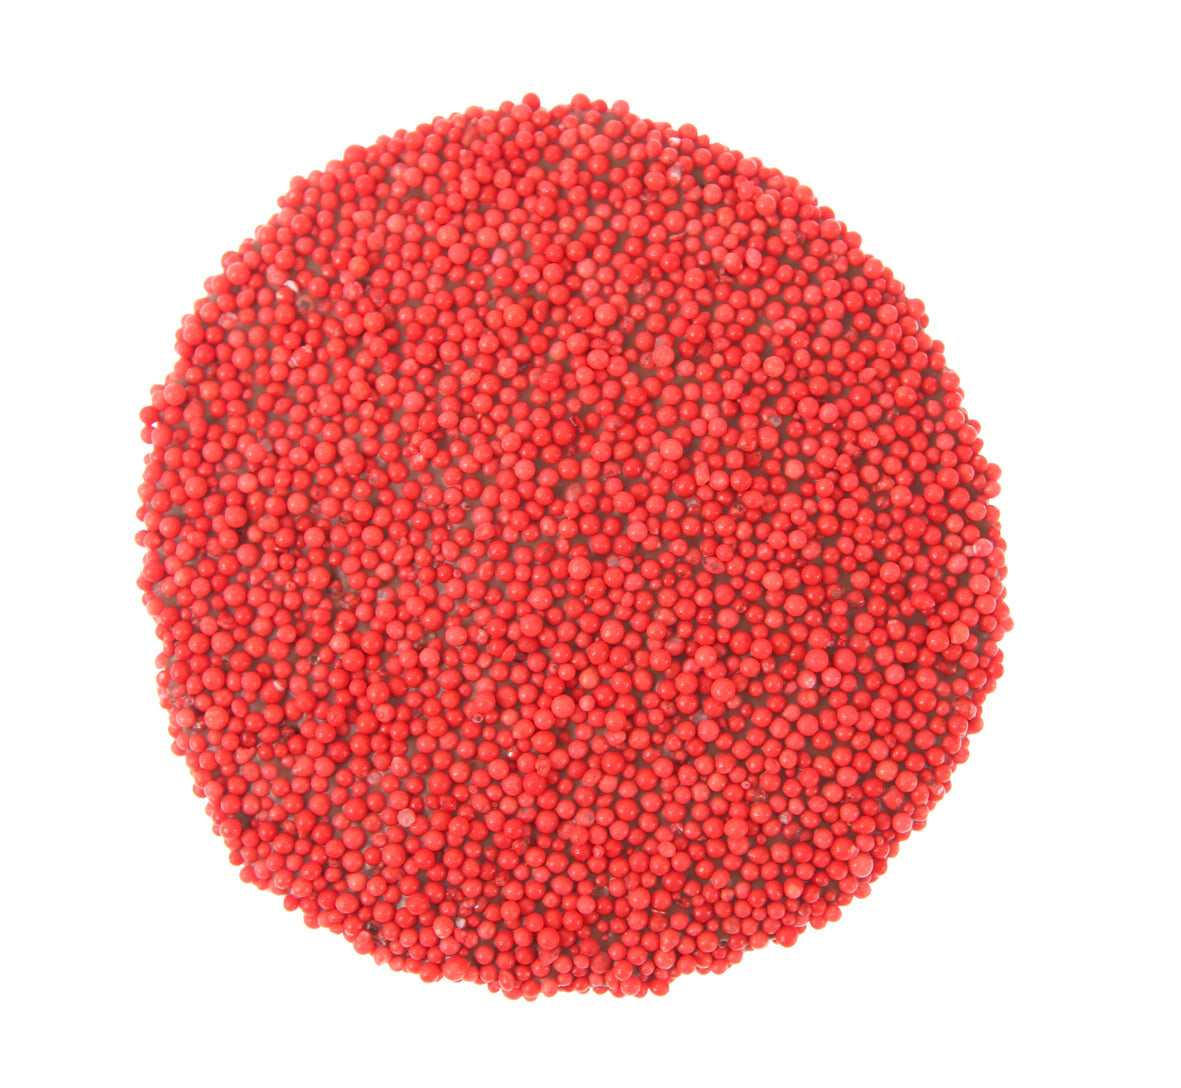 40g RED Single Freckle - No Front Label